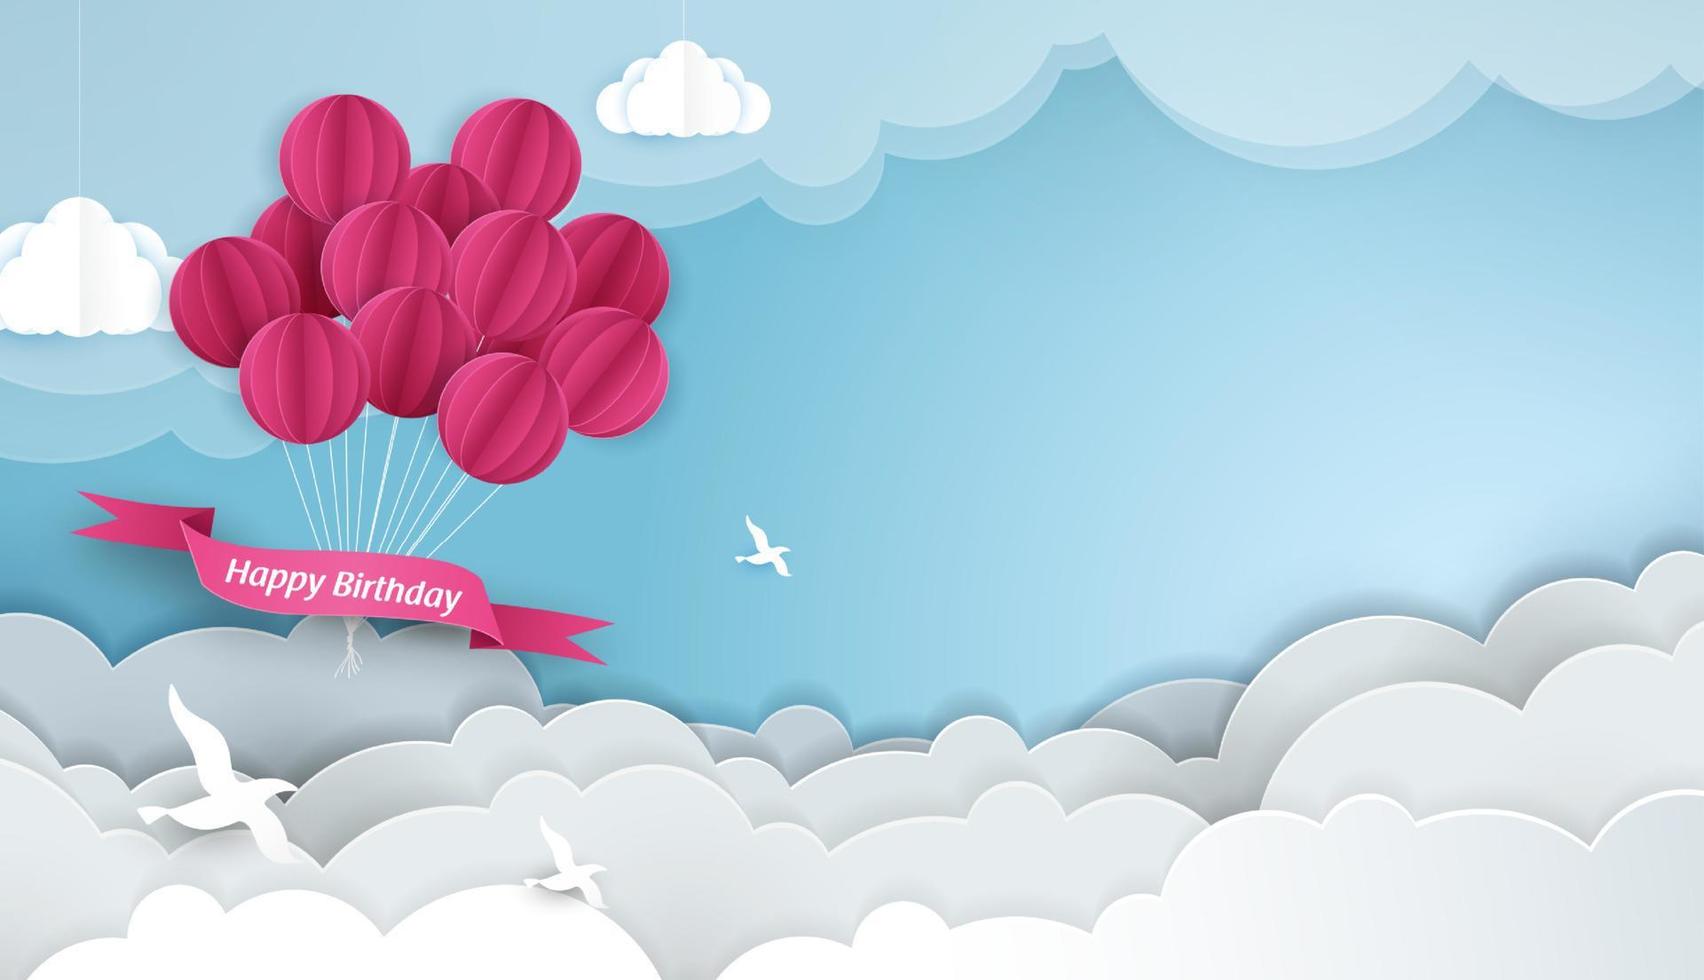 Paper art of birthday with balloon and cloud in the sky. can be used for Wallpaper, invitation, posters, banners. Vector design